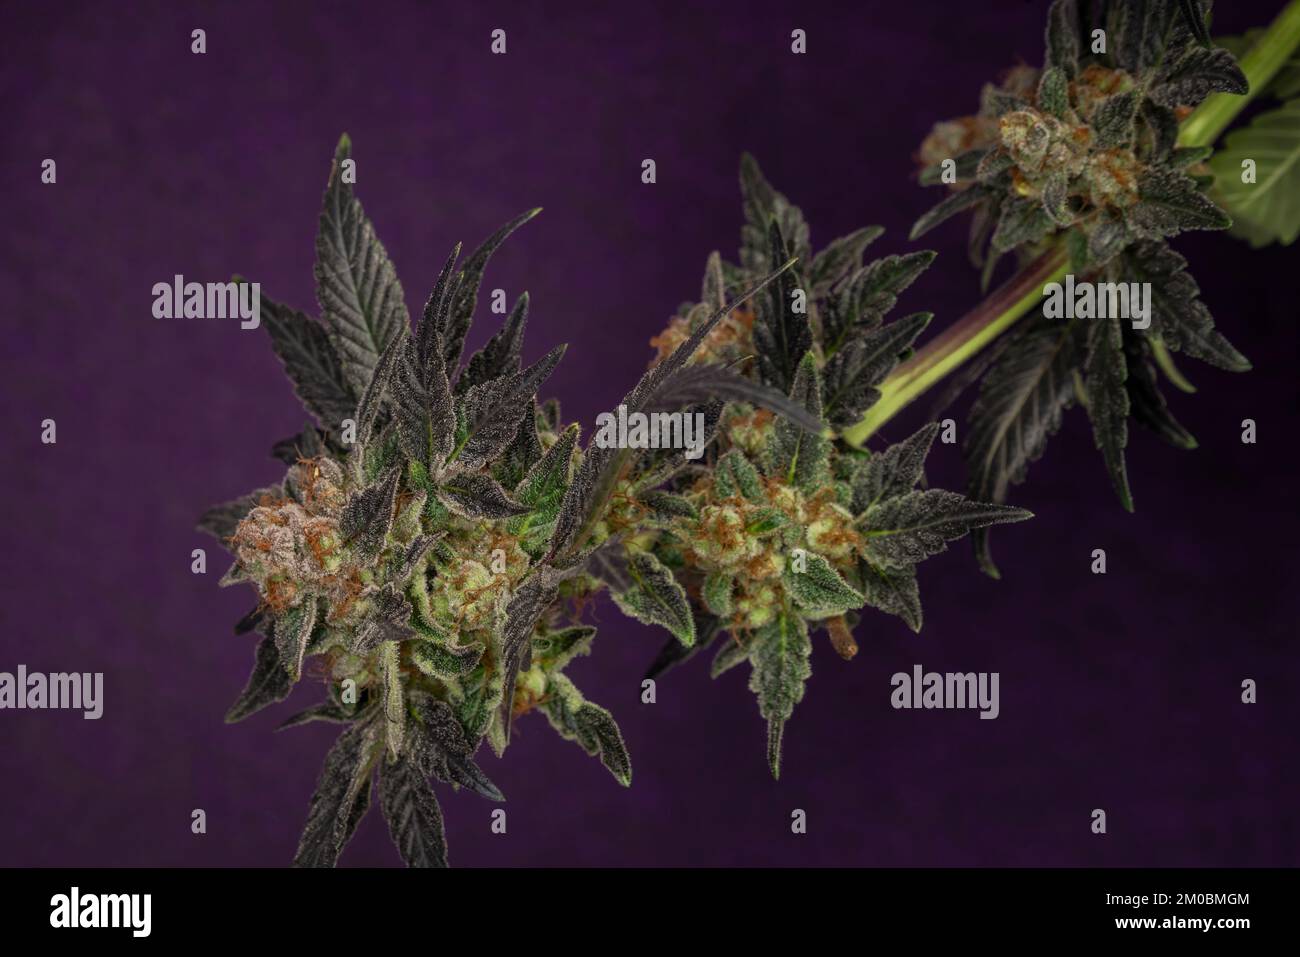 Bunch of flowers of marijuana ripened blooms with dark violet background Stock Photo